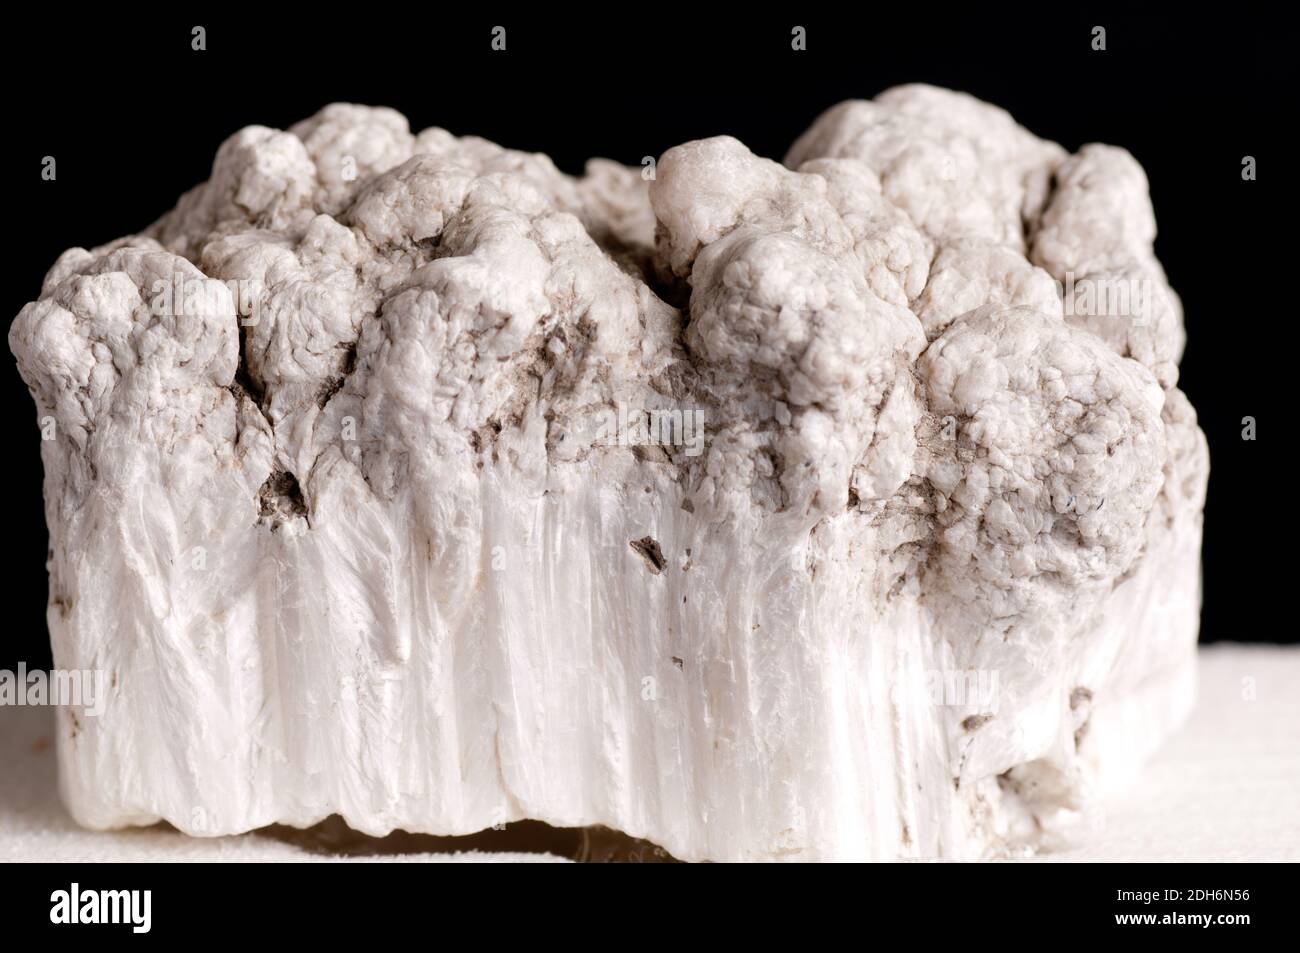 a large sample of inderdite or borate, borax mineral from california Stock Photo